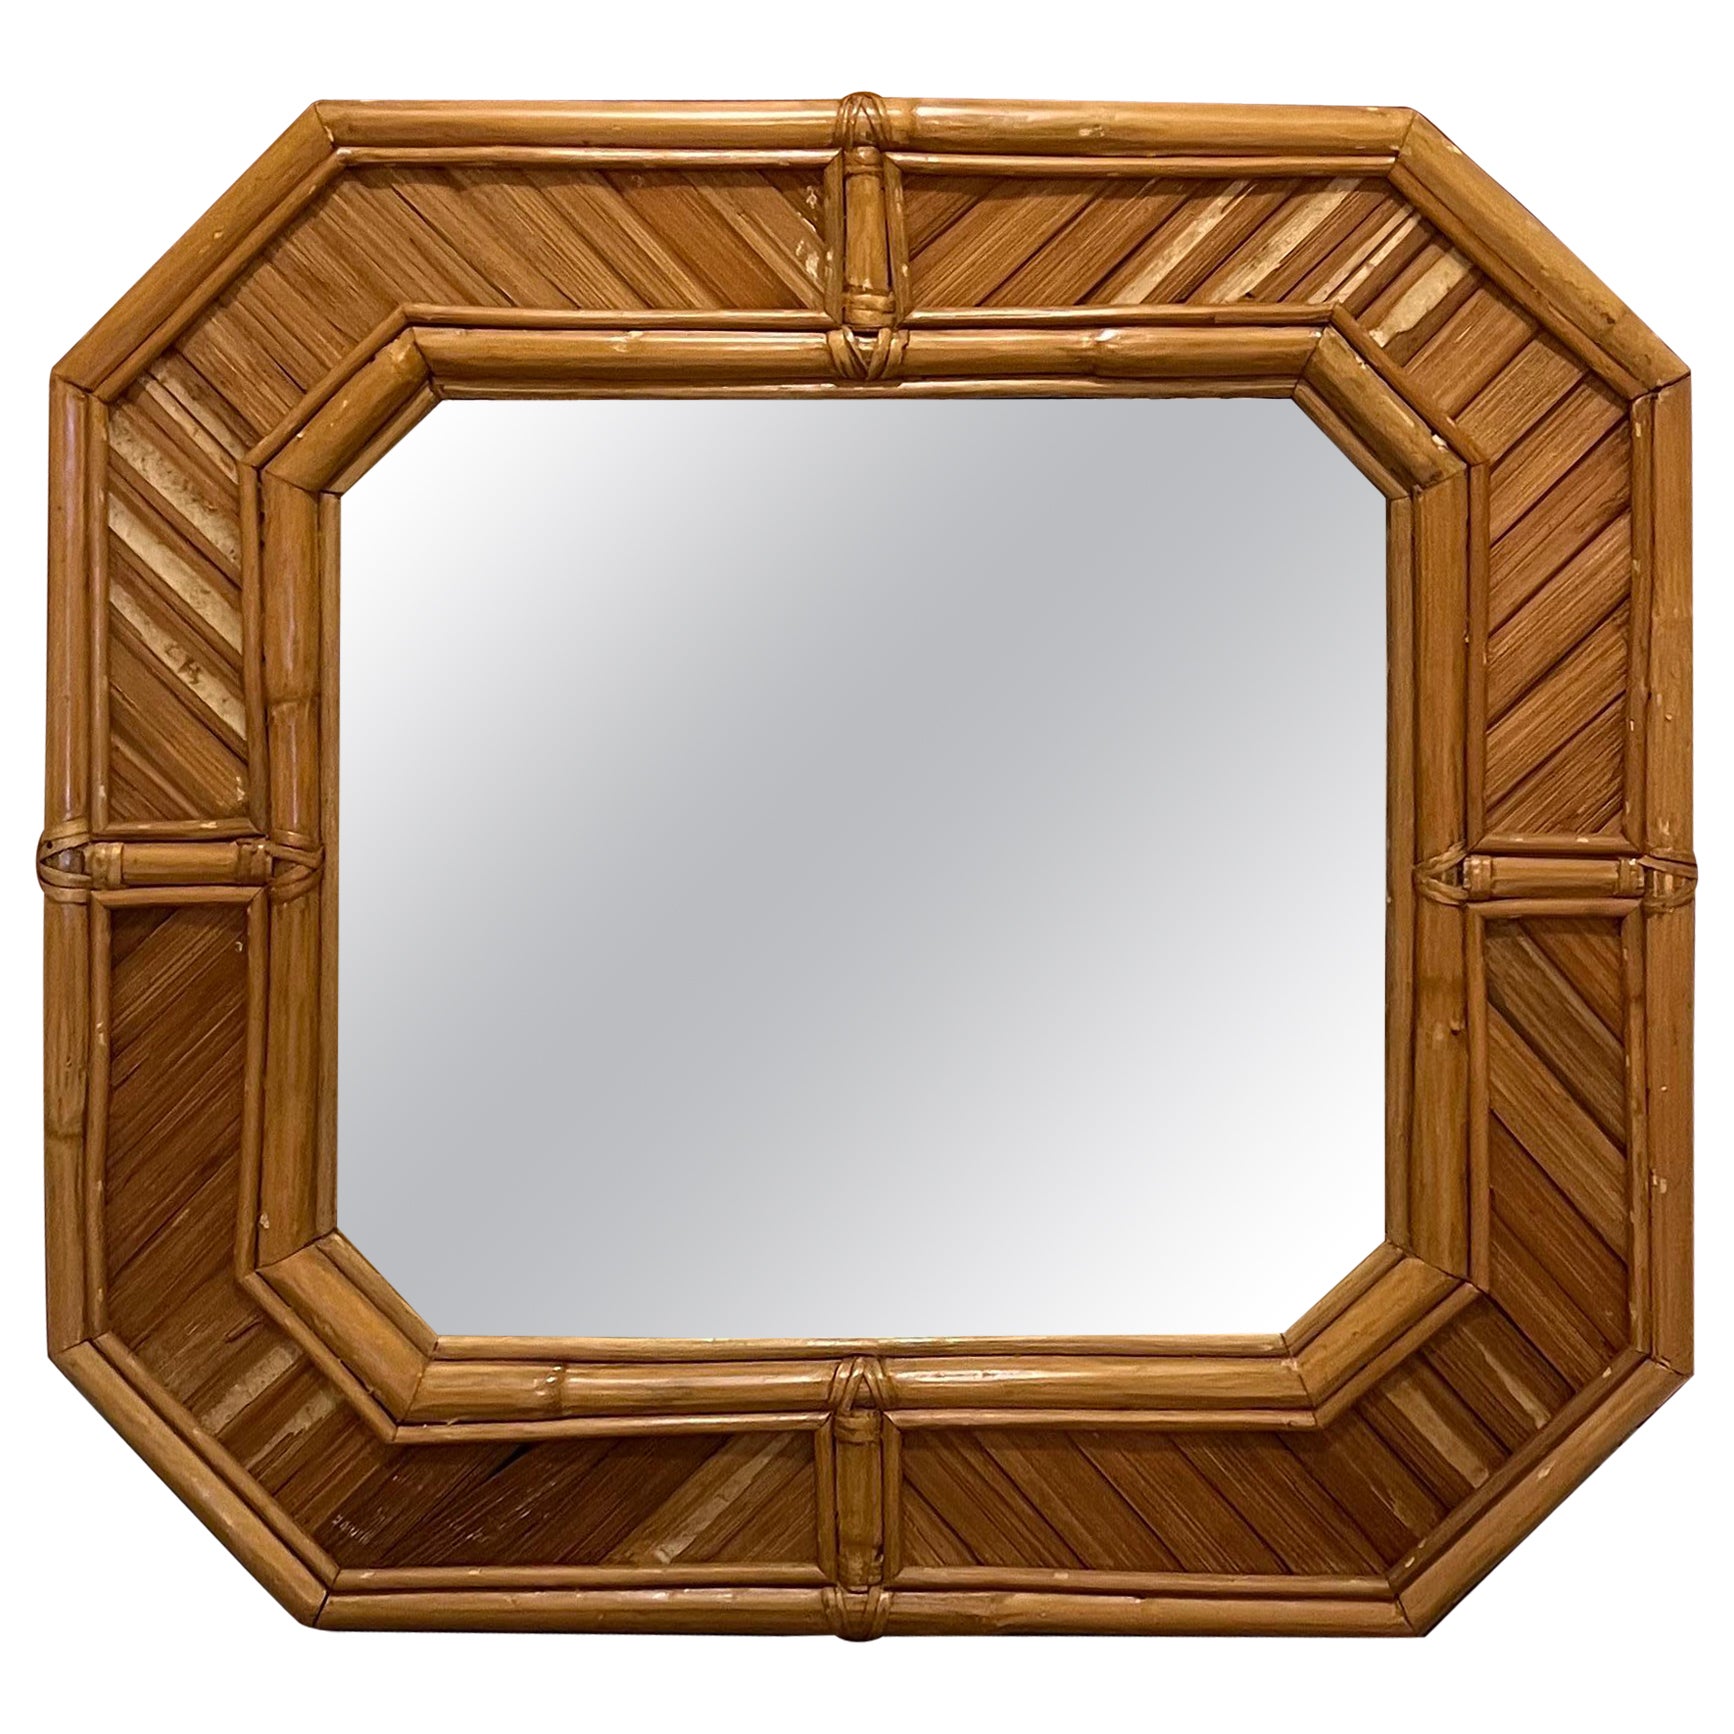 Rounded Square Bamboo Mirror For Sale